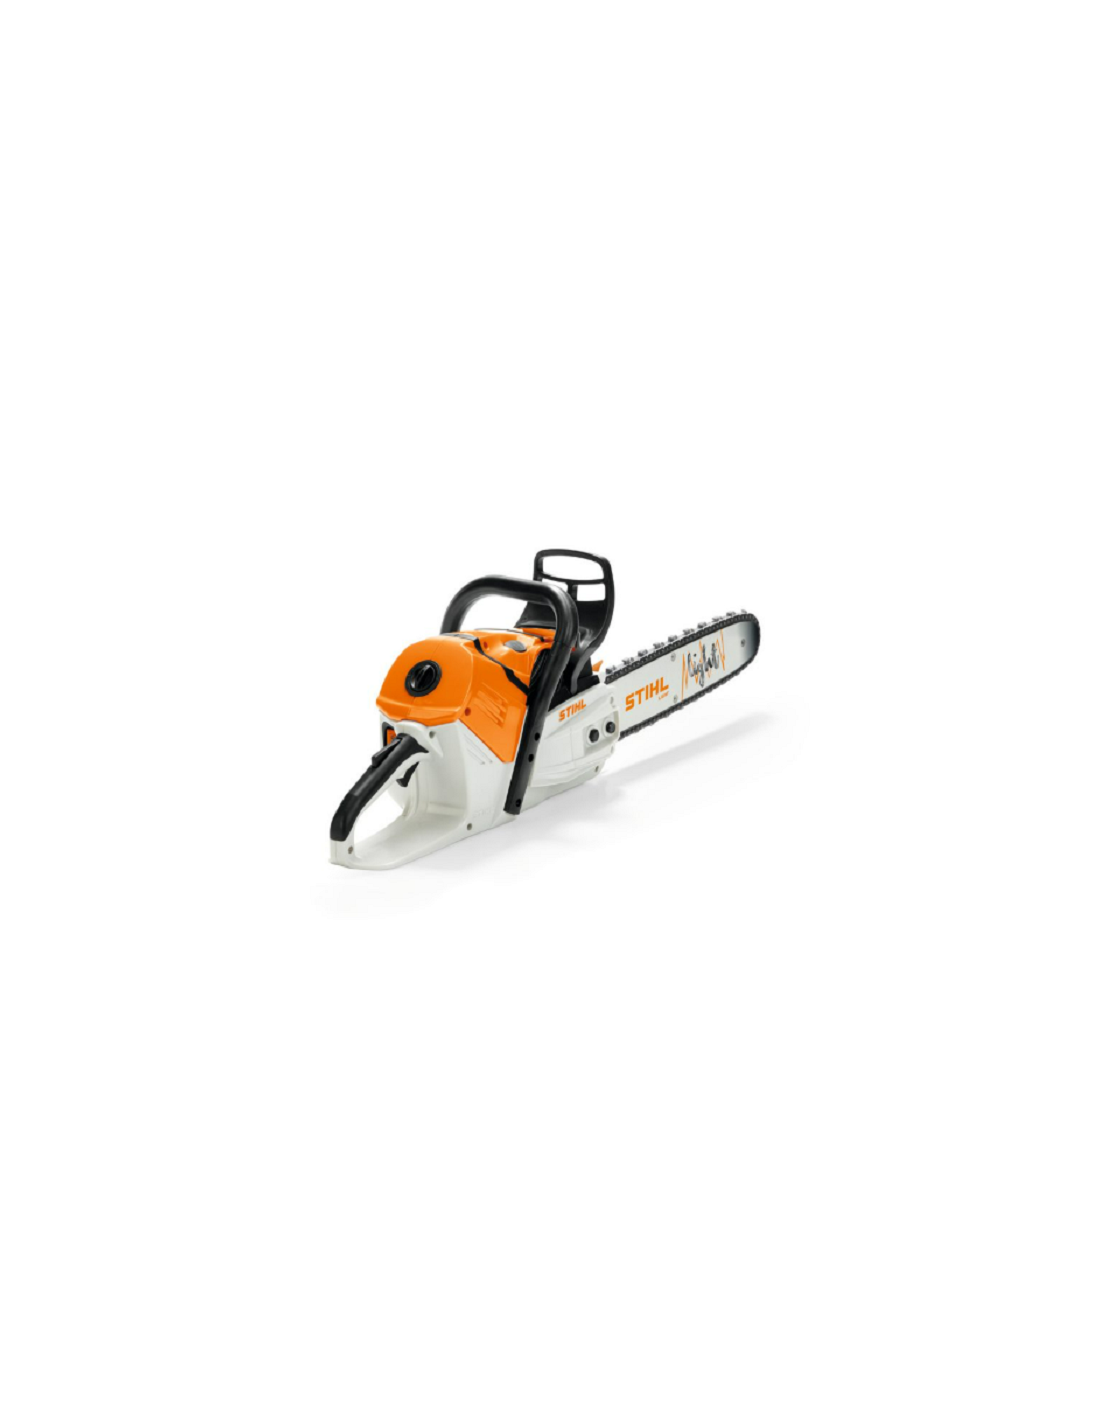 STIHL Battery Operated Chainsaw with Sound Kids Toy : : Toys